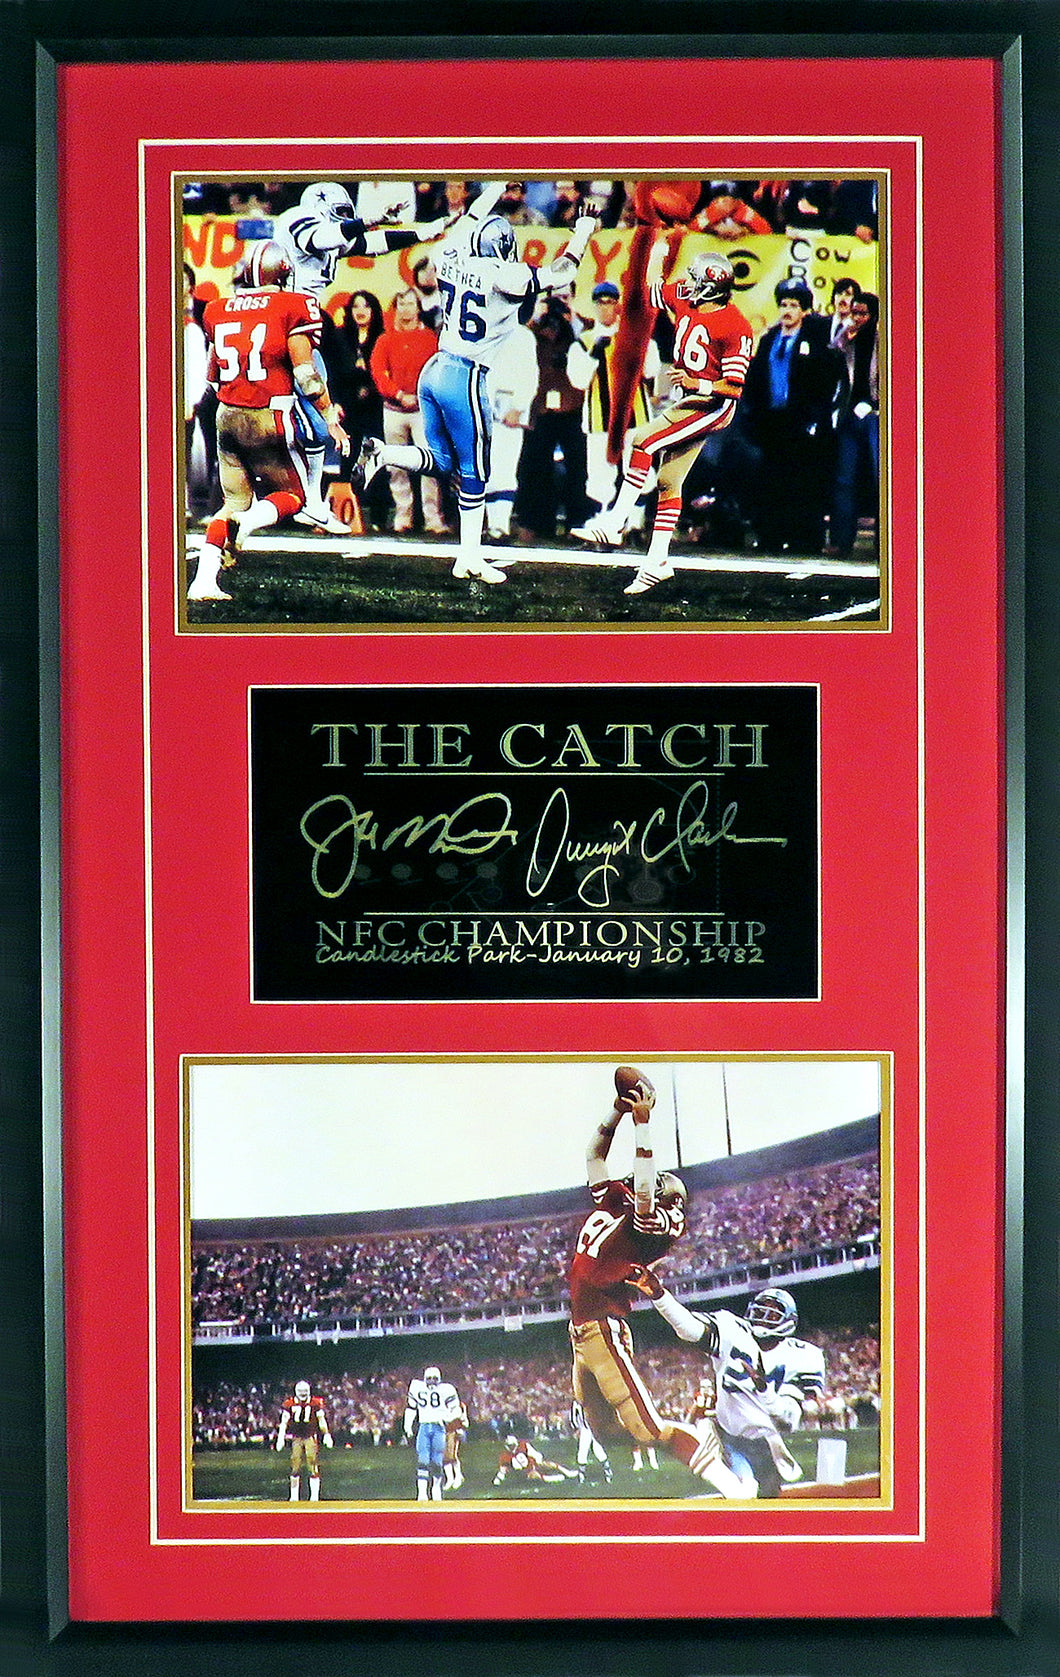 Joe Montana & Dwight Clark “THE CATCH” Framed Stack Display Engraved Series